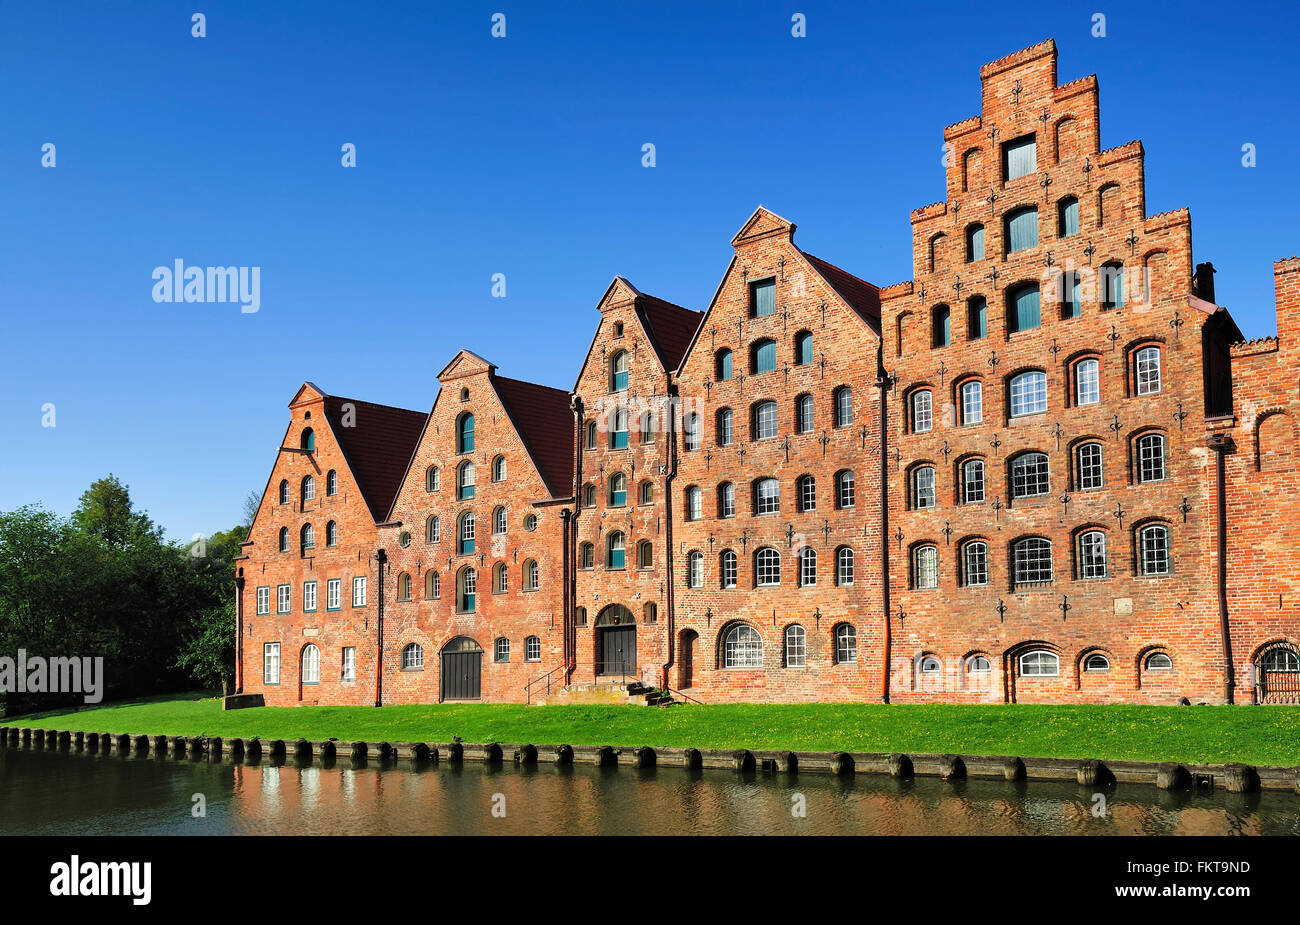 The Salzspeicher (salt storehouses), historic brick buildings, built in the 16th-18th century, Lubeck, Germany. Stock Photo